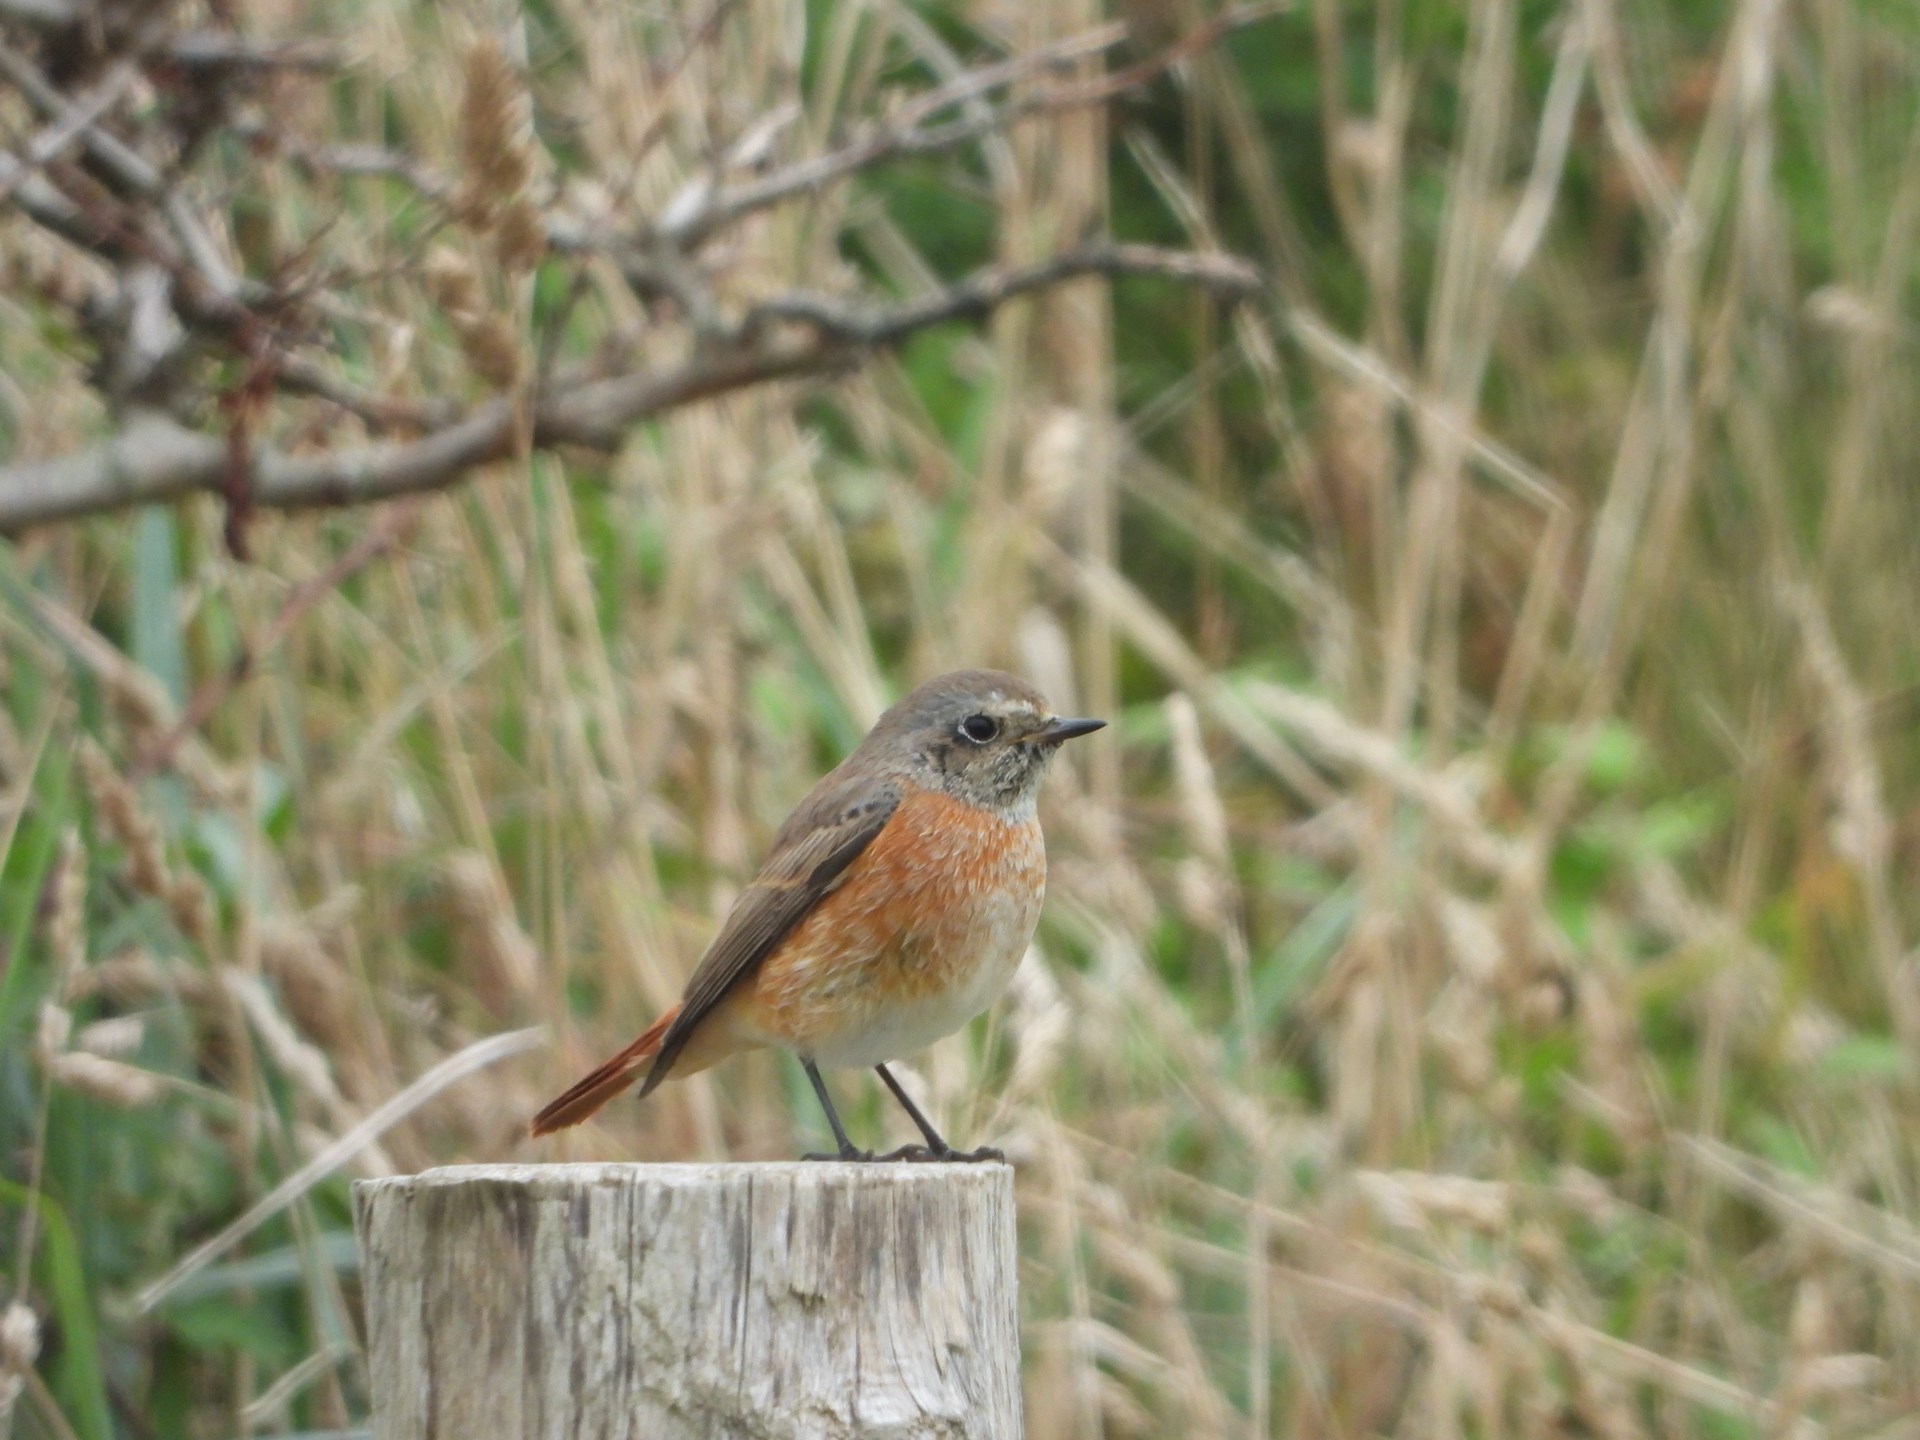 Female redstart typically sitting on a fence post